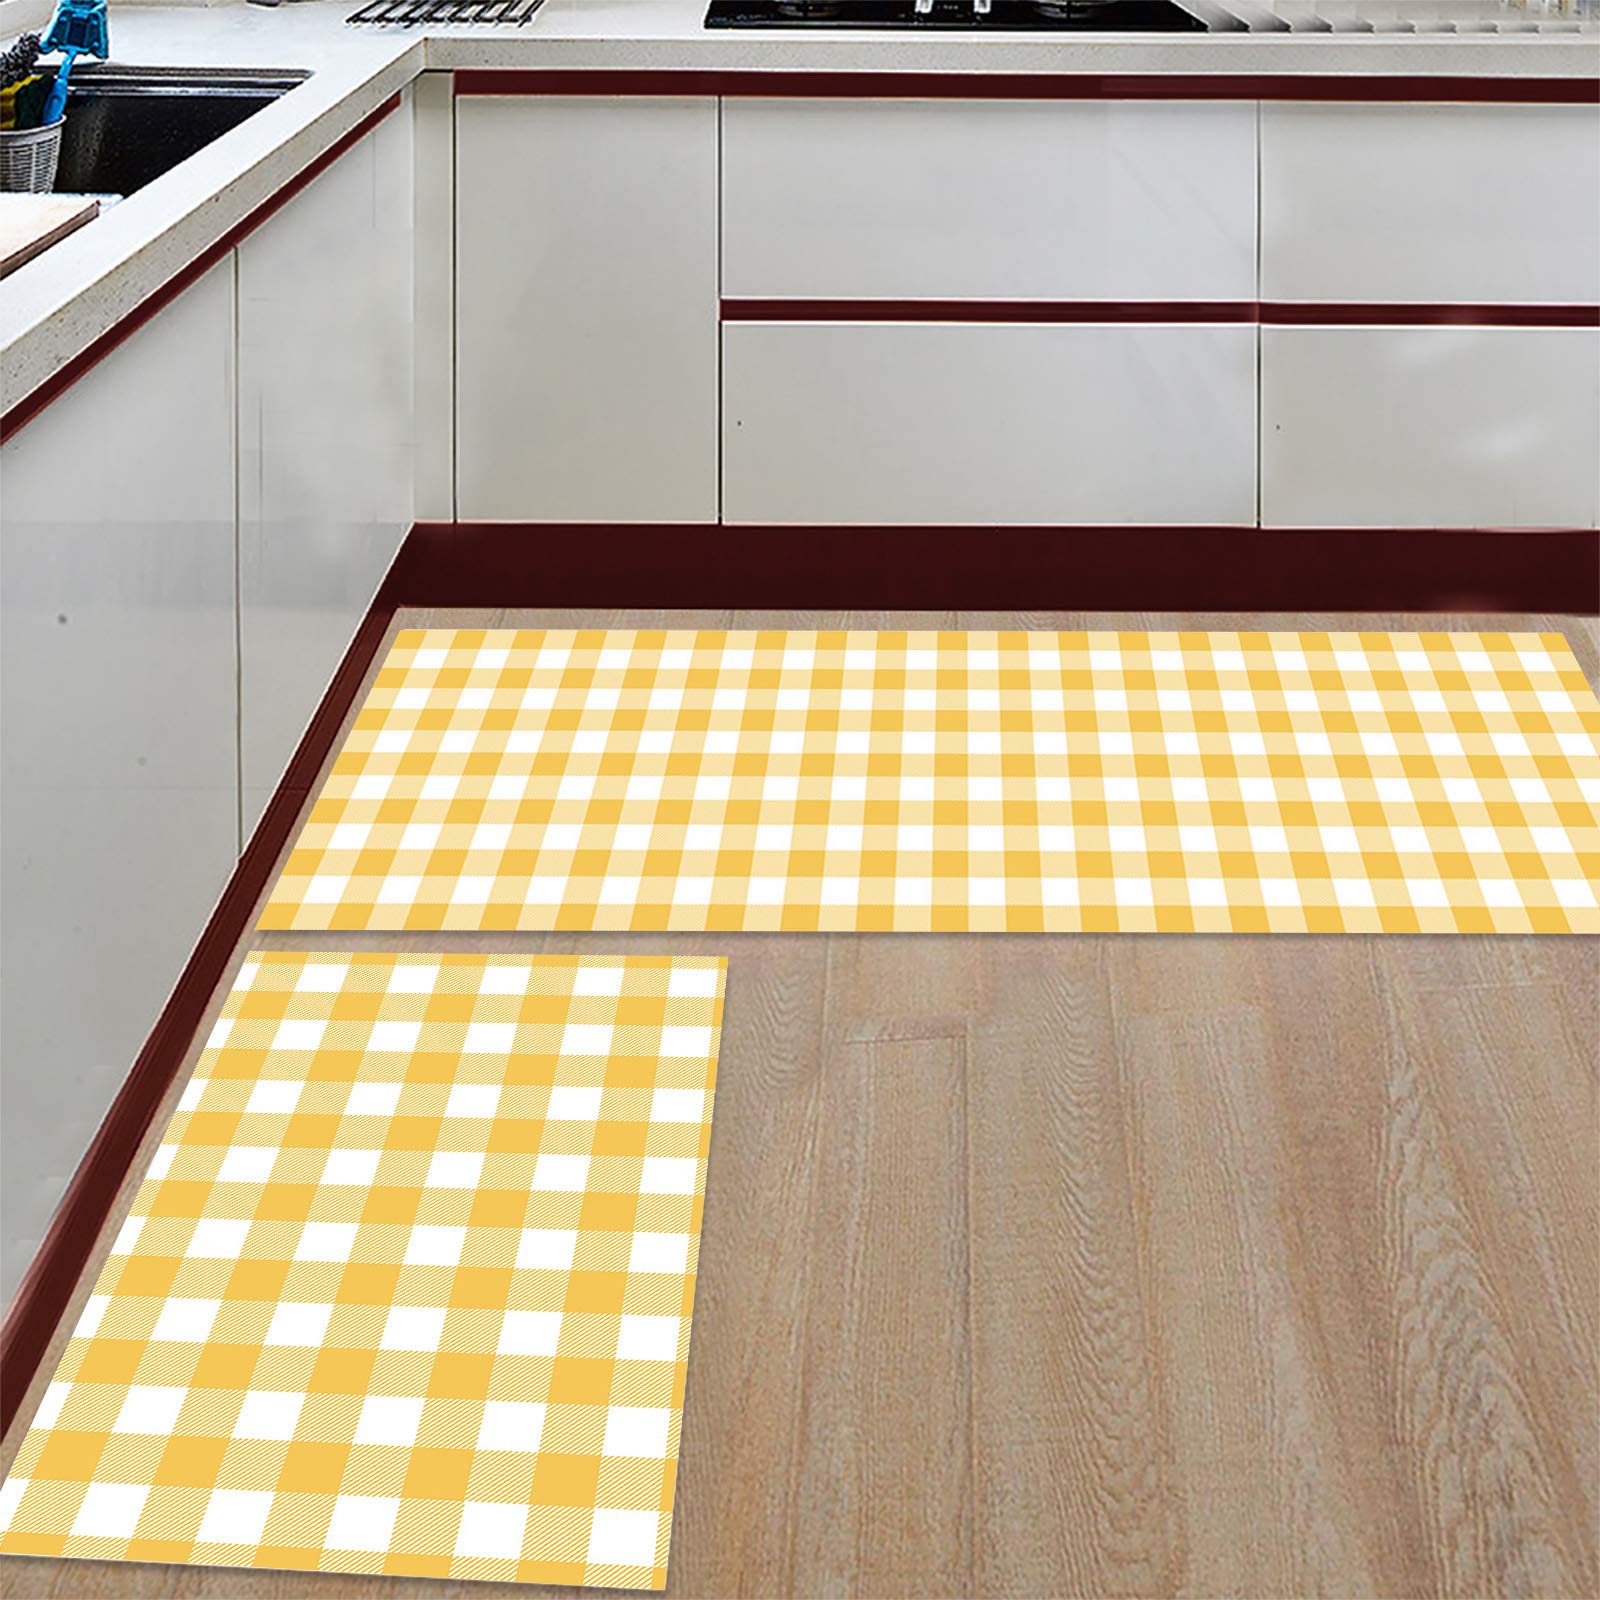 Kitchen Runner Rug, Country Style Yellow and White Buffalo Check Plaid Checkered Non Slip Runner Carpet Door Mats Floor Mat for Bedroom Bedside Laundry Bathroom Set of 2